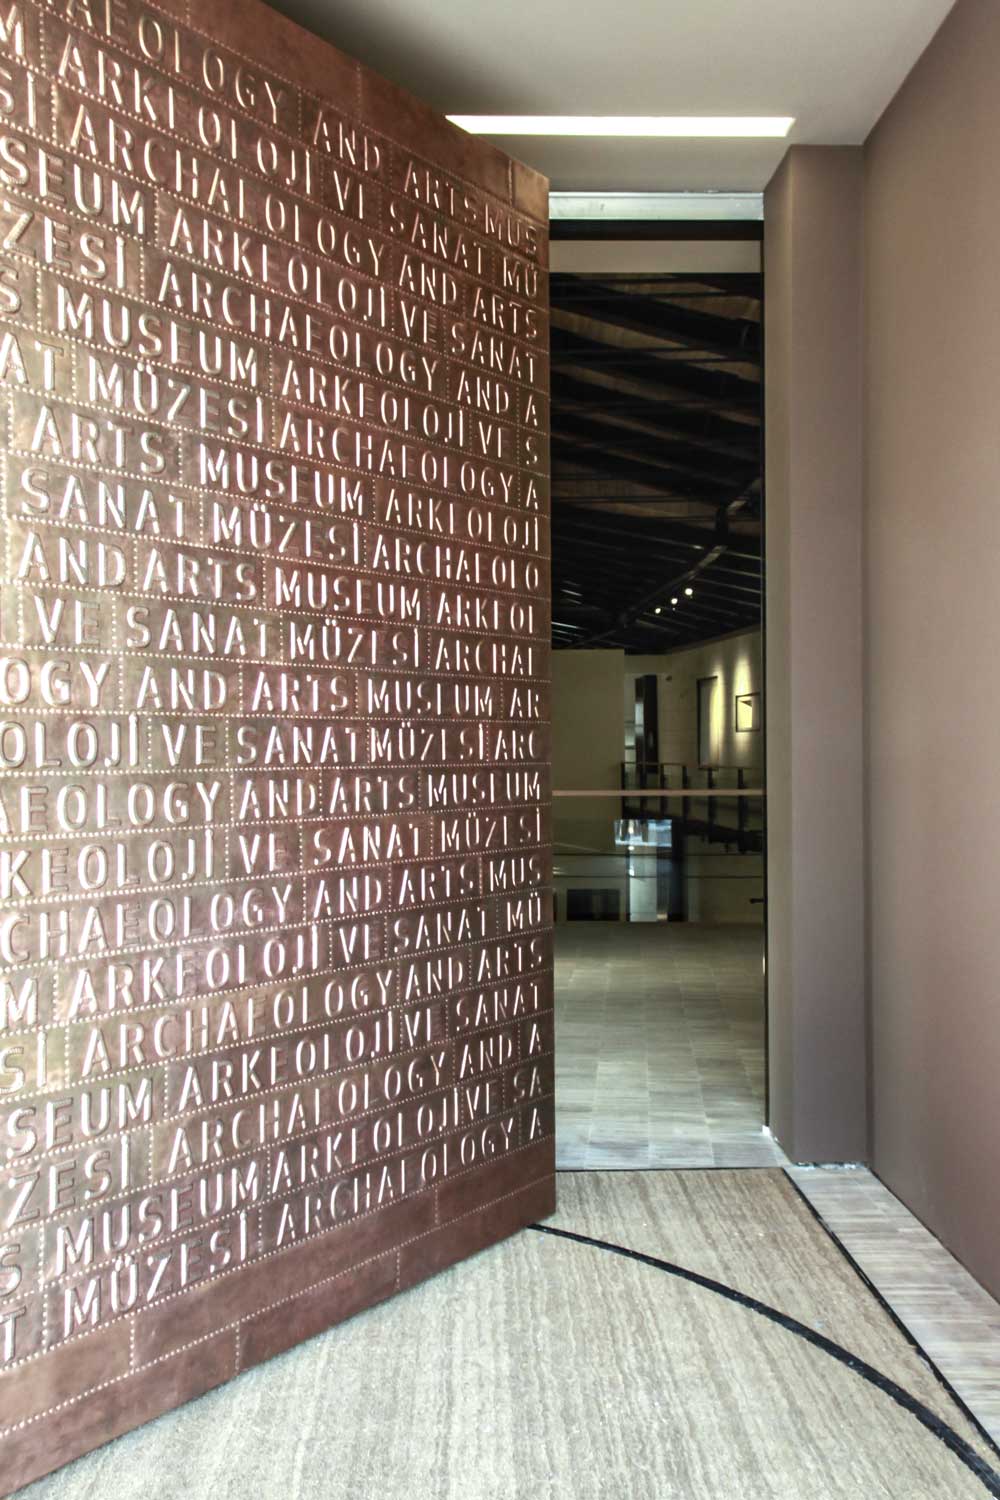 Decorative museum branding on a wall reading: Archaeology and Arts Museum / Arkeoloji ve Sanat Müzesi in the entryway of gallery spaces.